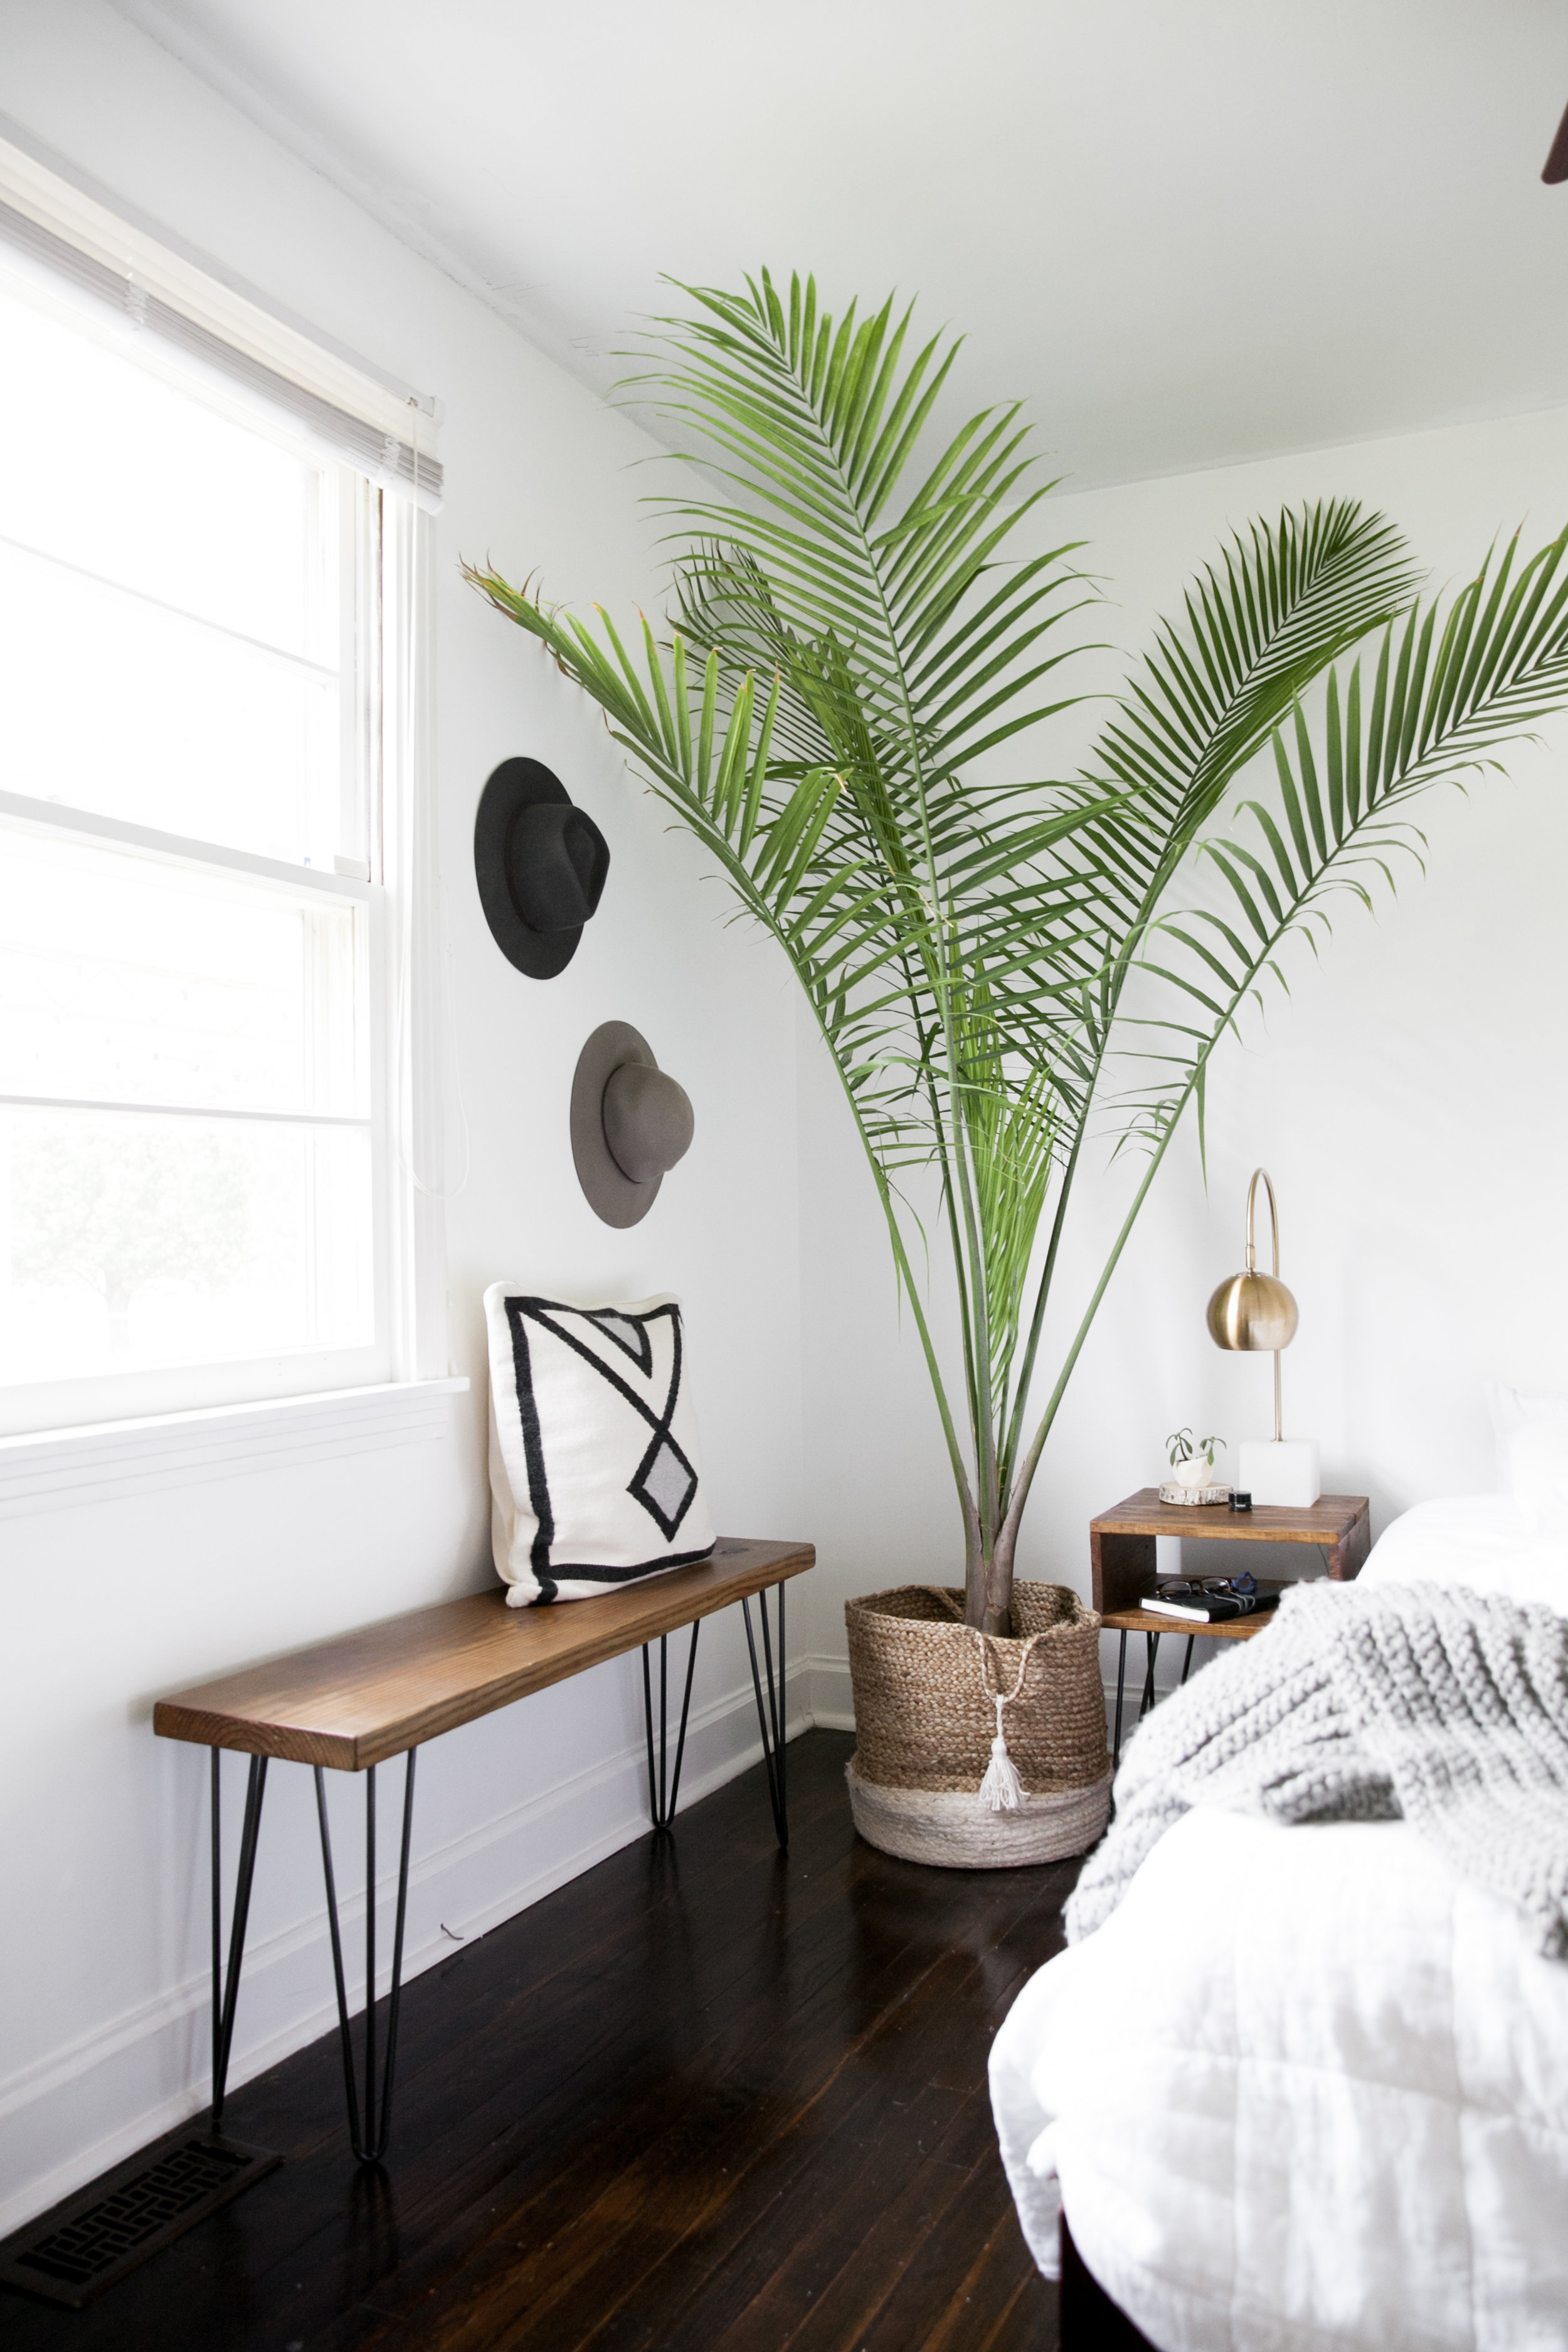 15 Fascinating Bedrooms With Plants That Look Like A